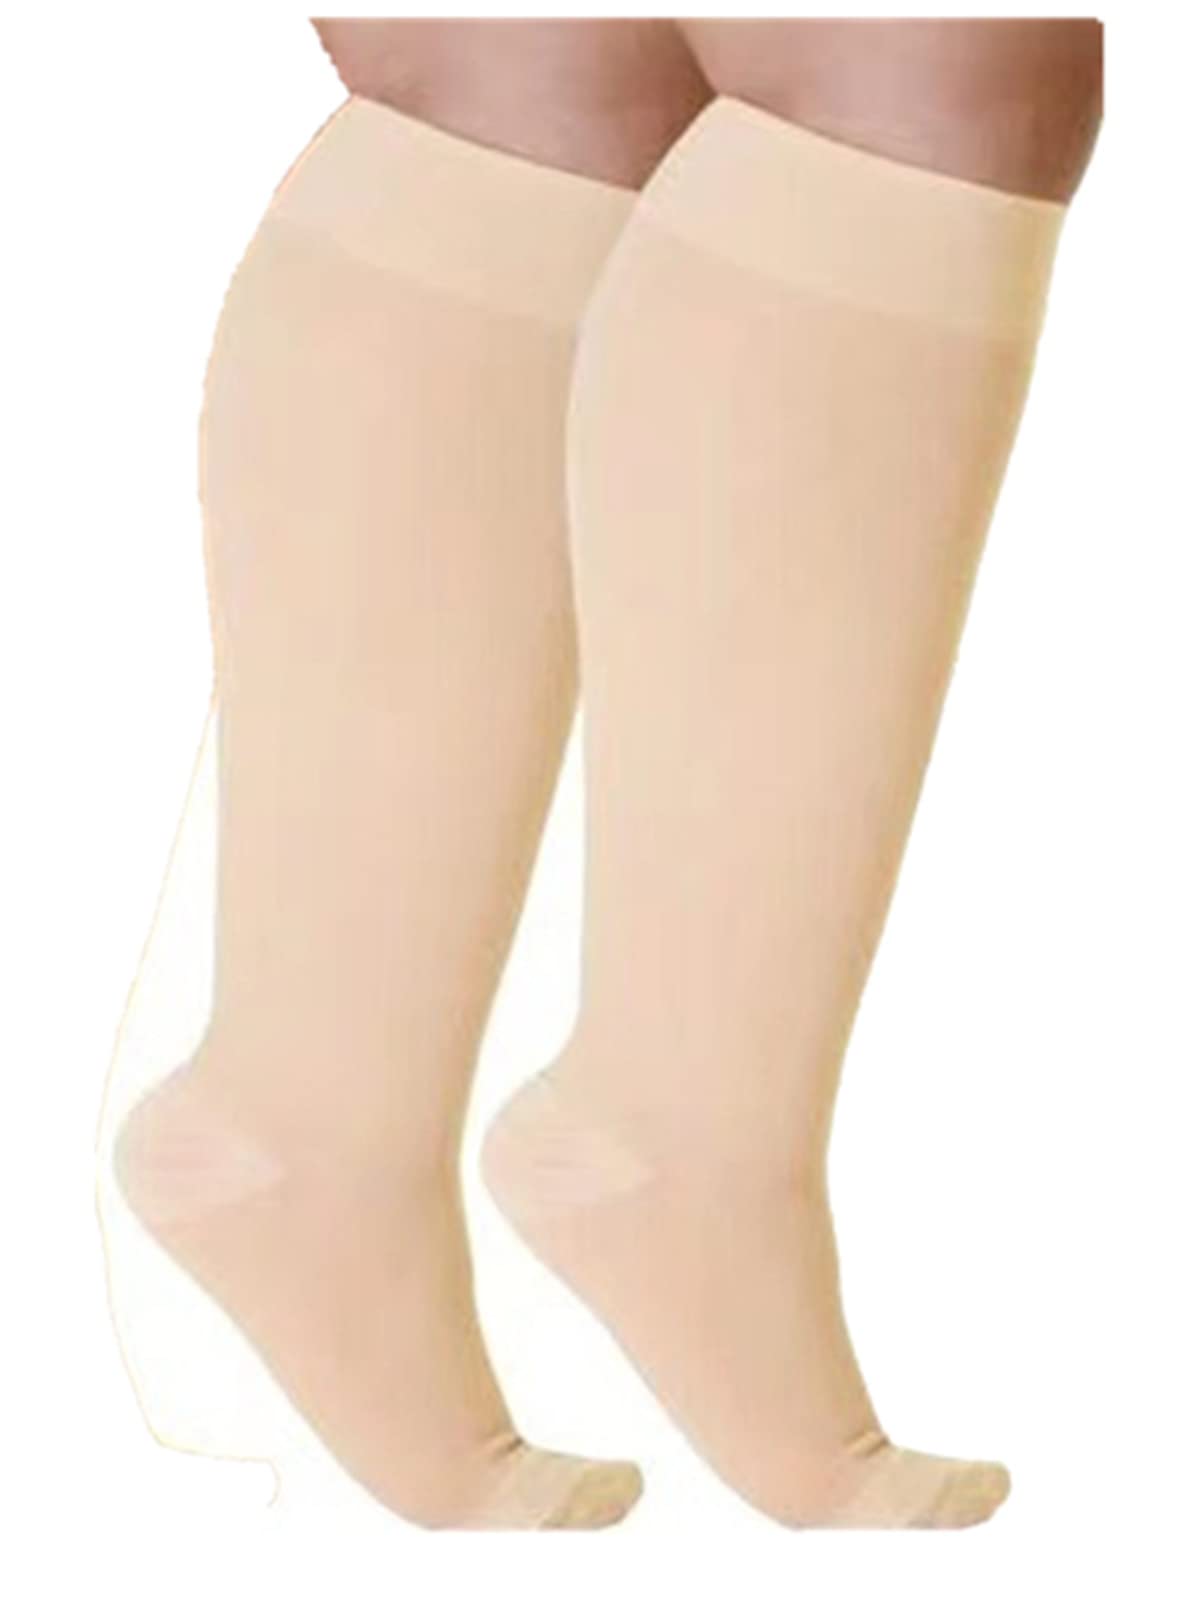 3XL Plus Size Womens Footless Compression Tights 20-30mmHg - Beige, 3X-Large